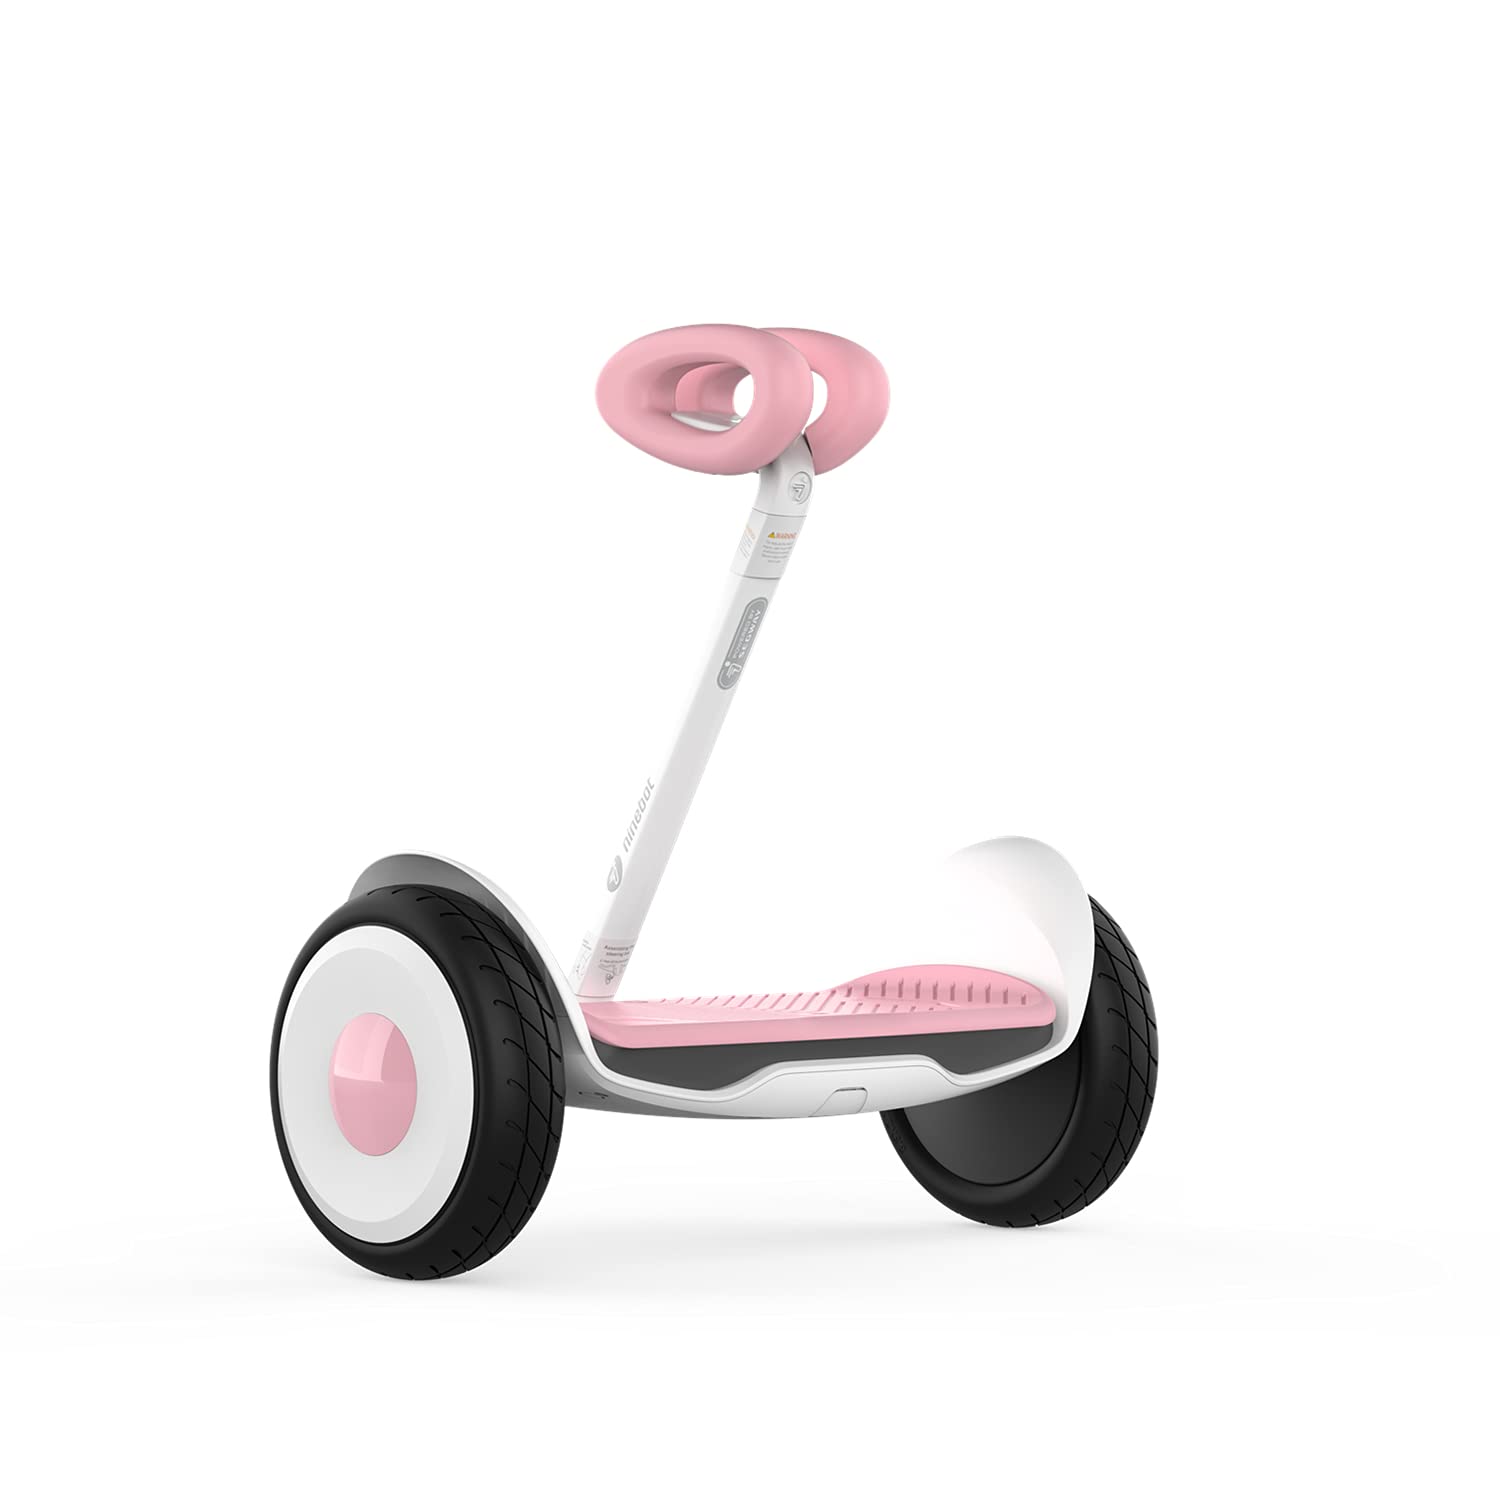 Segway Ninebot S Kids Smart Self-Balancing Electric Scooter, 800 Watts Power, 8 Miles Range & 8.7MPH, Hoverboard with LED Light, UL-2272 Certified ninebot s kids Small Pink,  Only $299.99